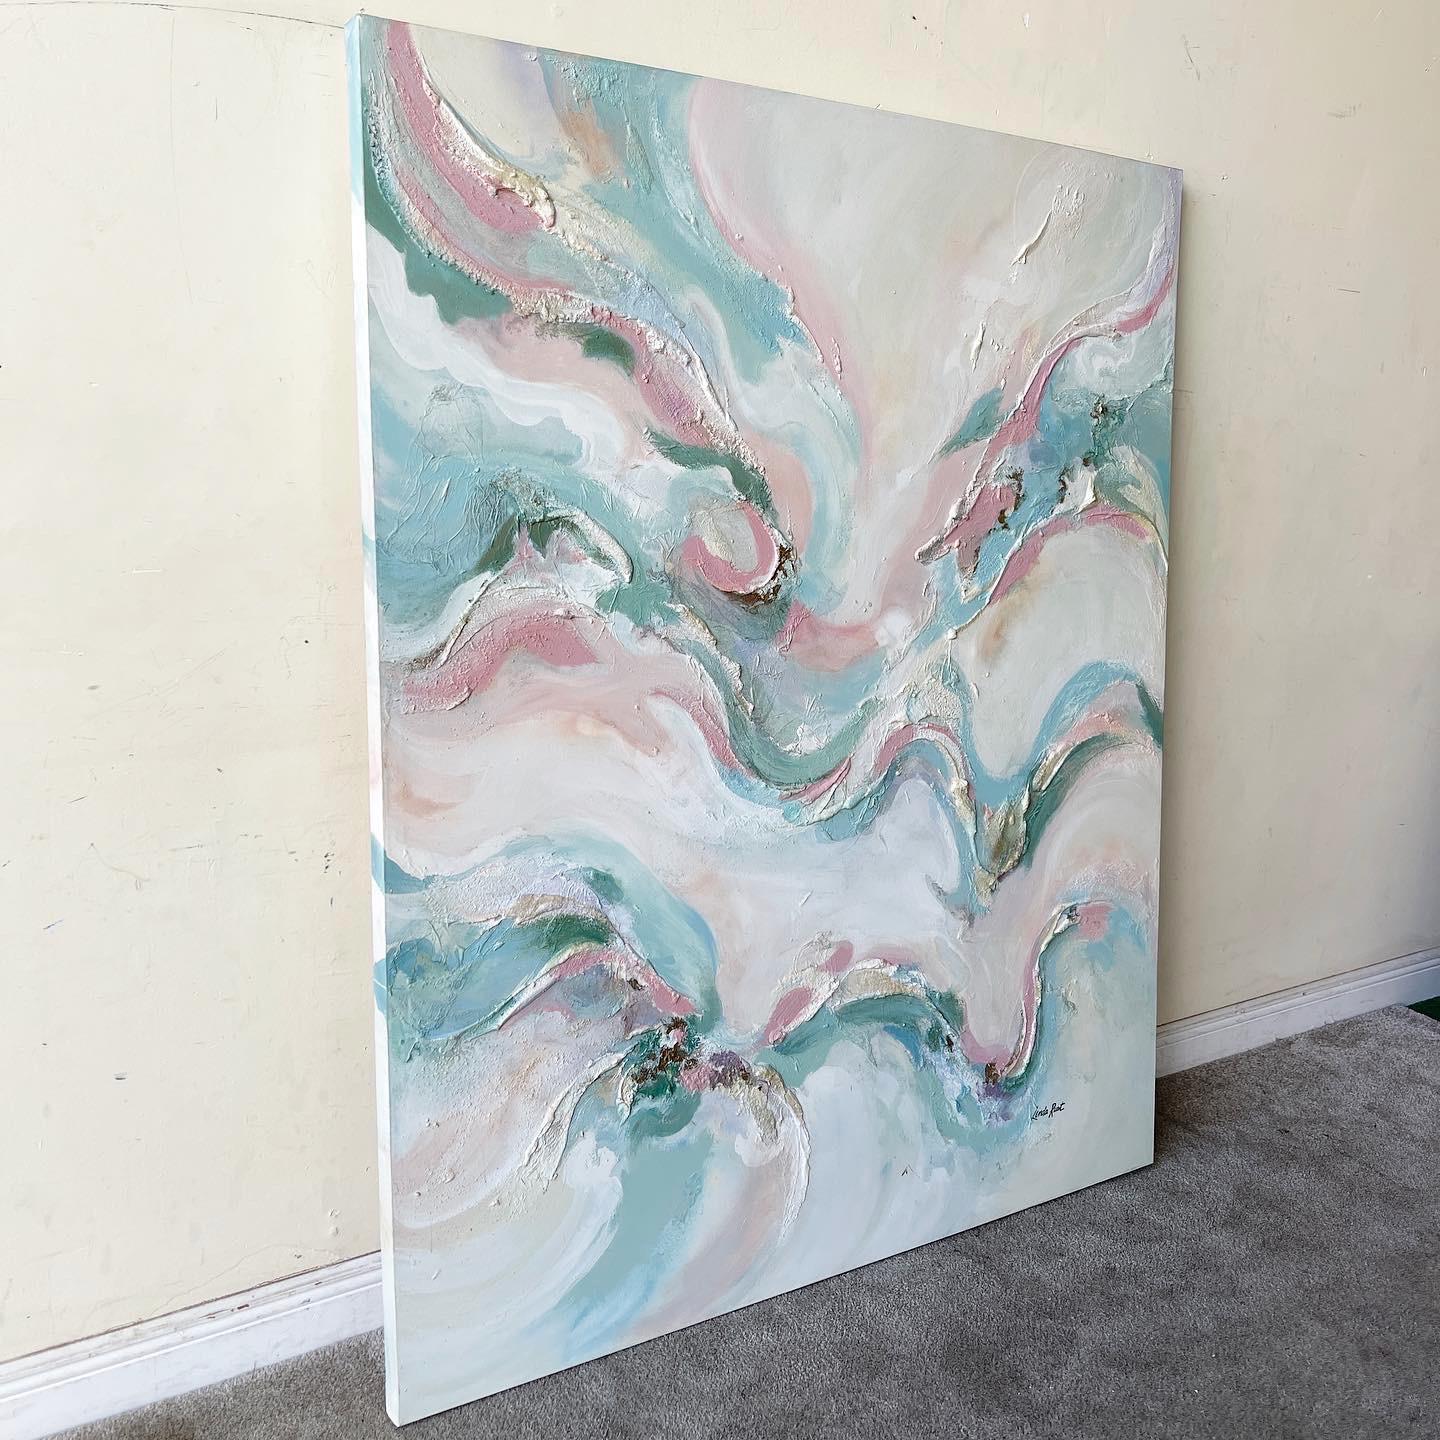 Incredible postmodern abstract oil painting by Linda Rust. Features thick swirls of pink green and white oil paint.

Additional information:
Material: Canvas
Color: Green
Style: Postmodern
Artist: Linda Rust
Time Period: 1980s
Place of origin: